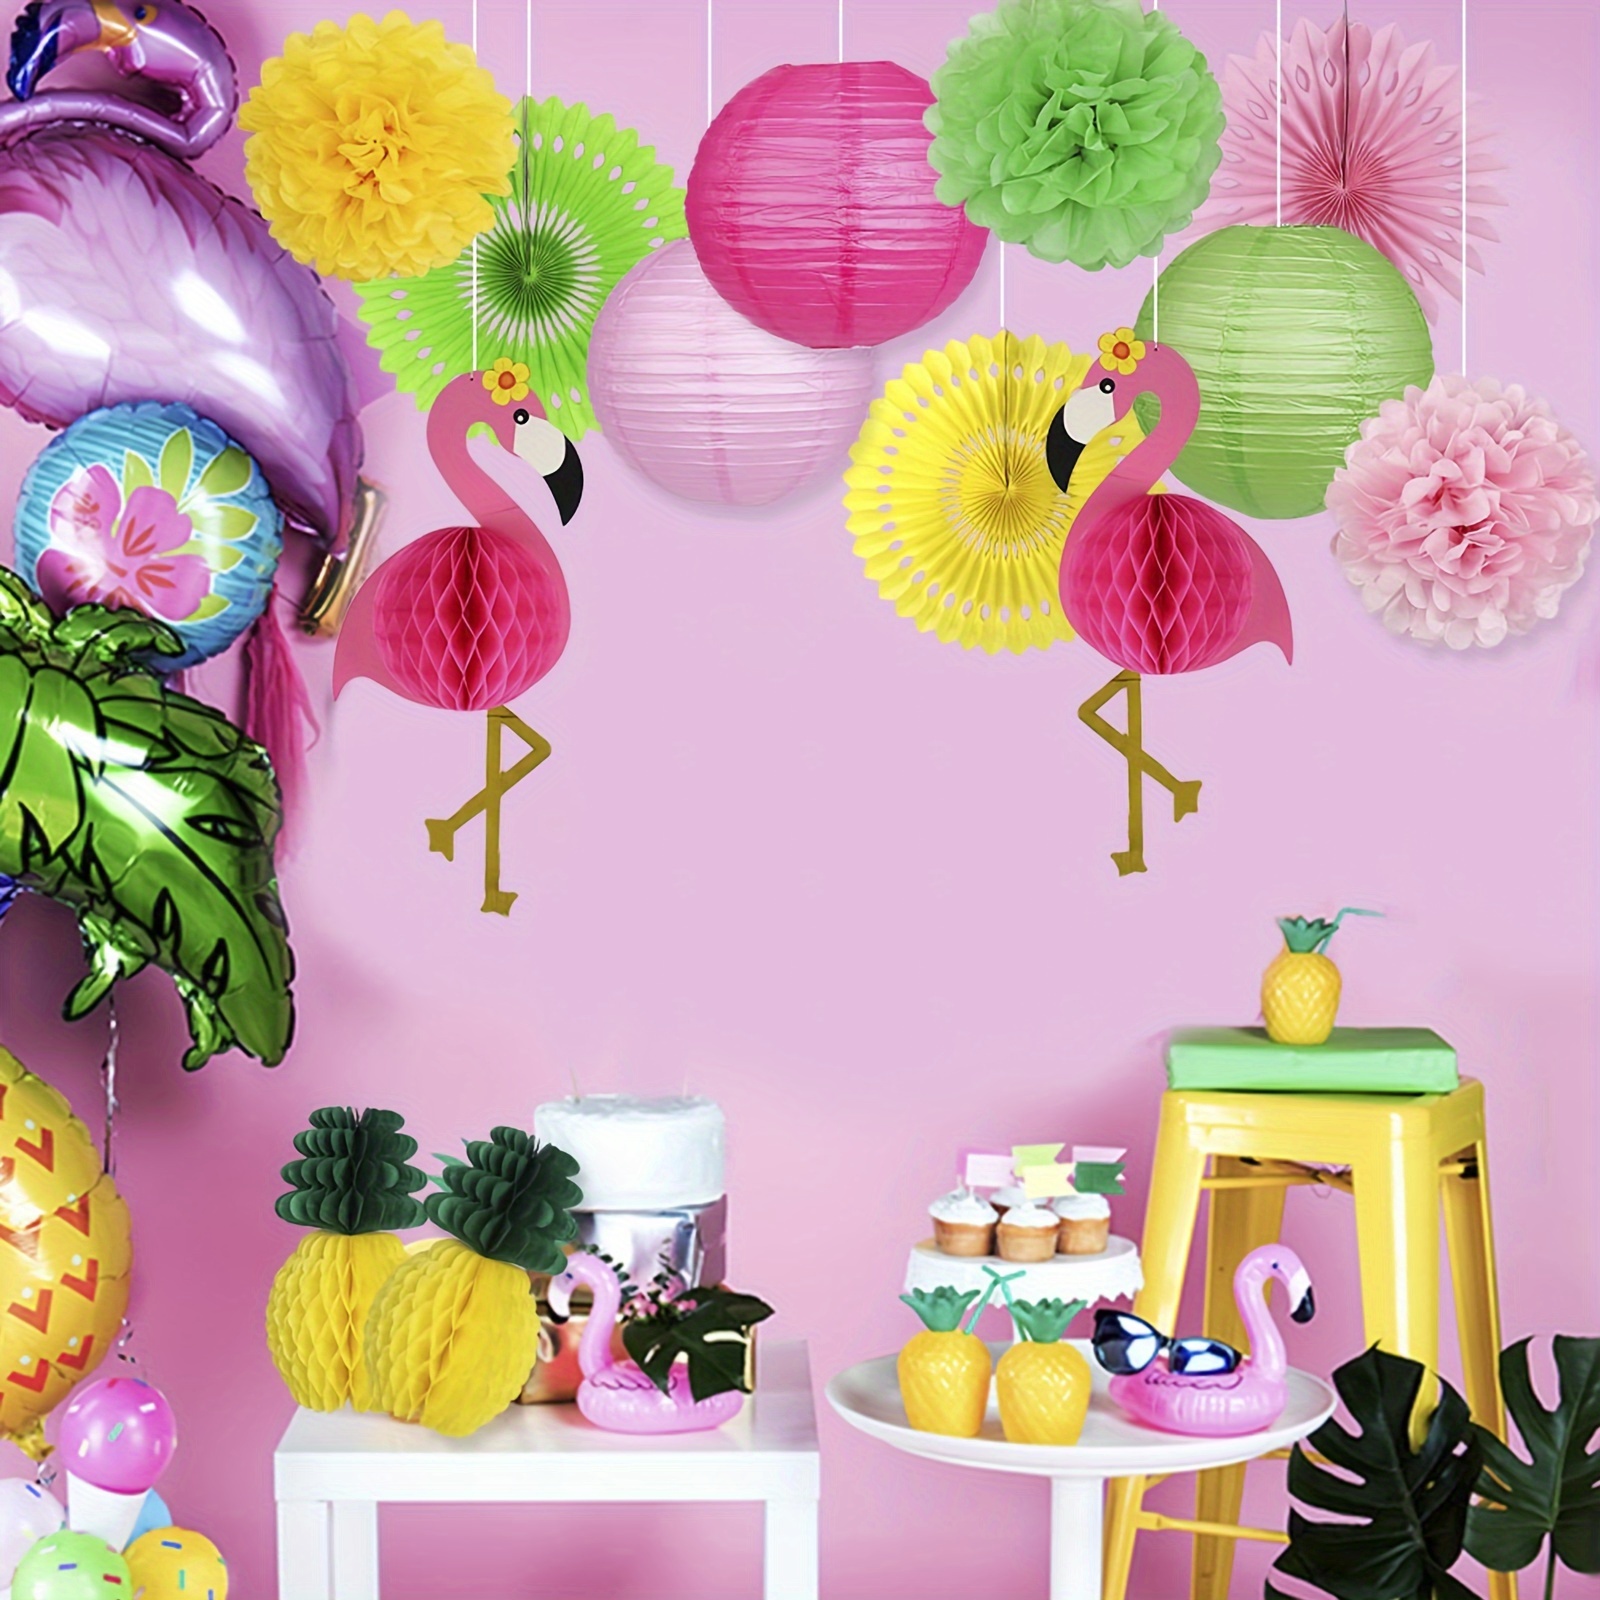 

Summer Party Decorations - Flamingo & Pineapple Honeycomb Balls, Paper Lanterns, Paper Fans, Tissue Pom Poms Set For Birthday, Bachelorette, Tropical Luau Party - Mixed Color, Iron & Paper